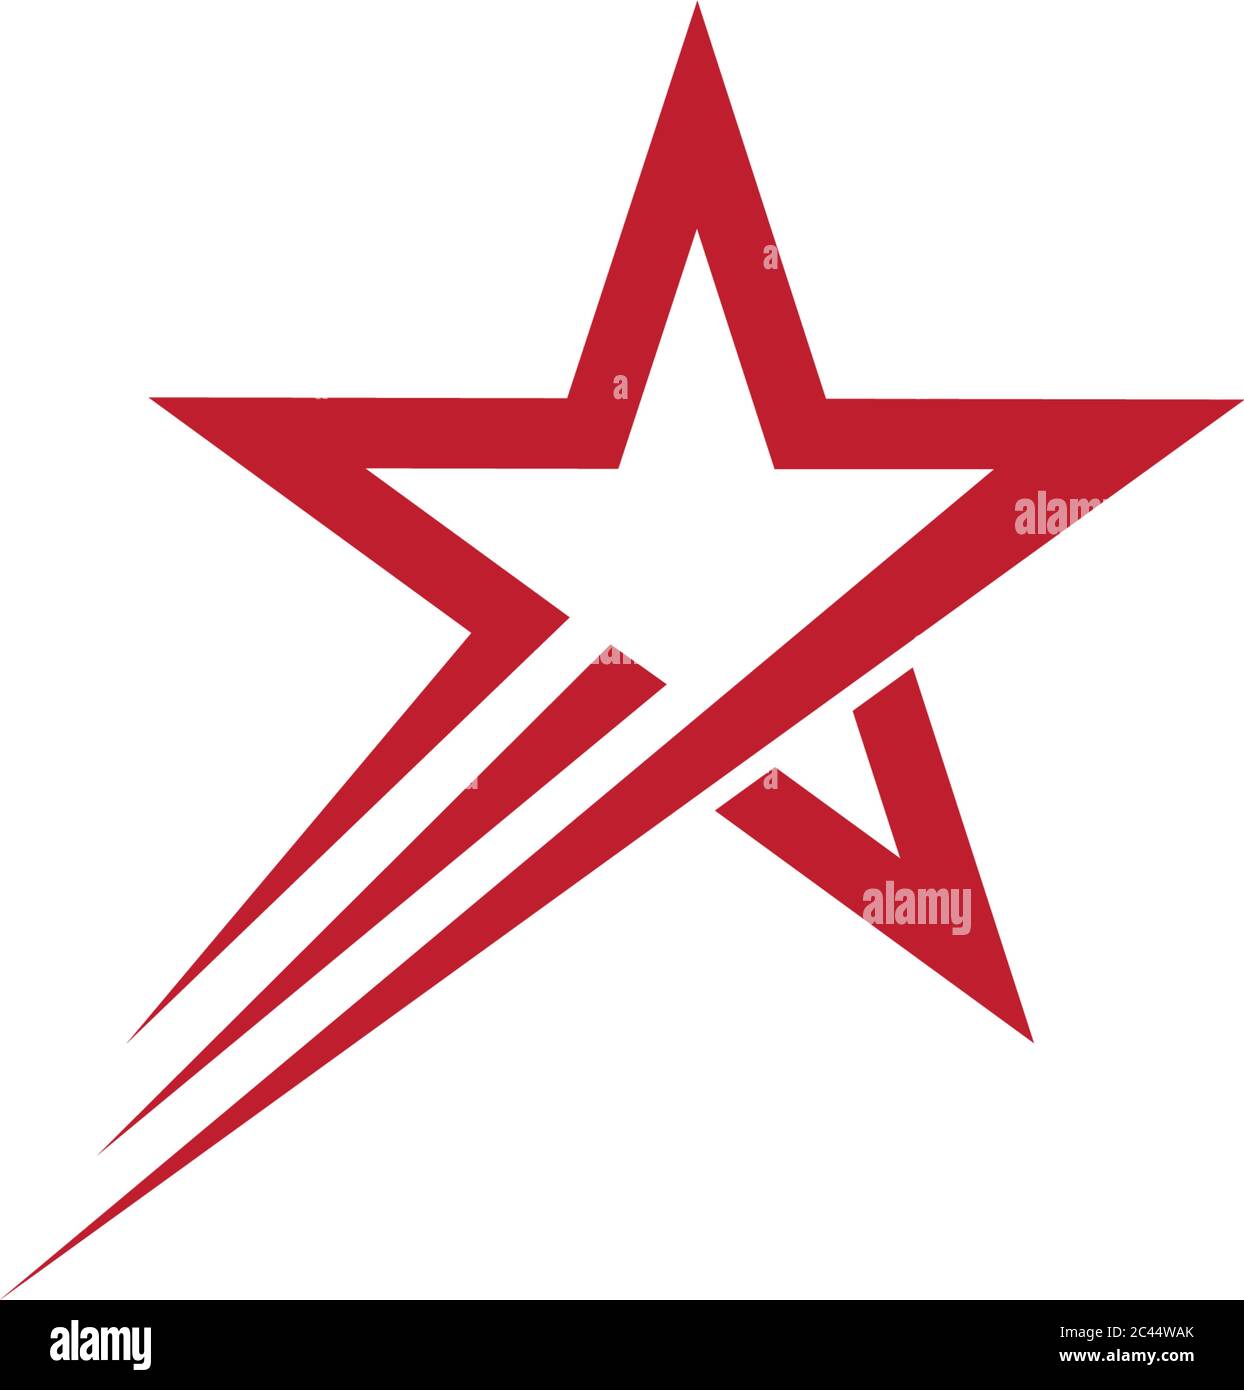 Star Logo High Resolution Stock Photography and Images - Alamy